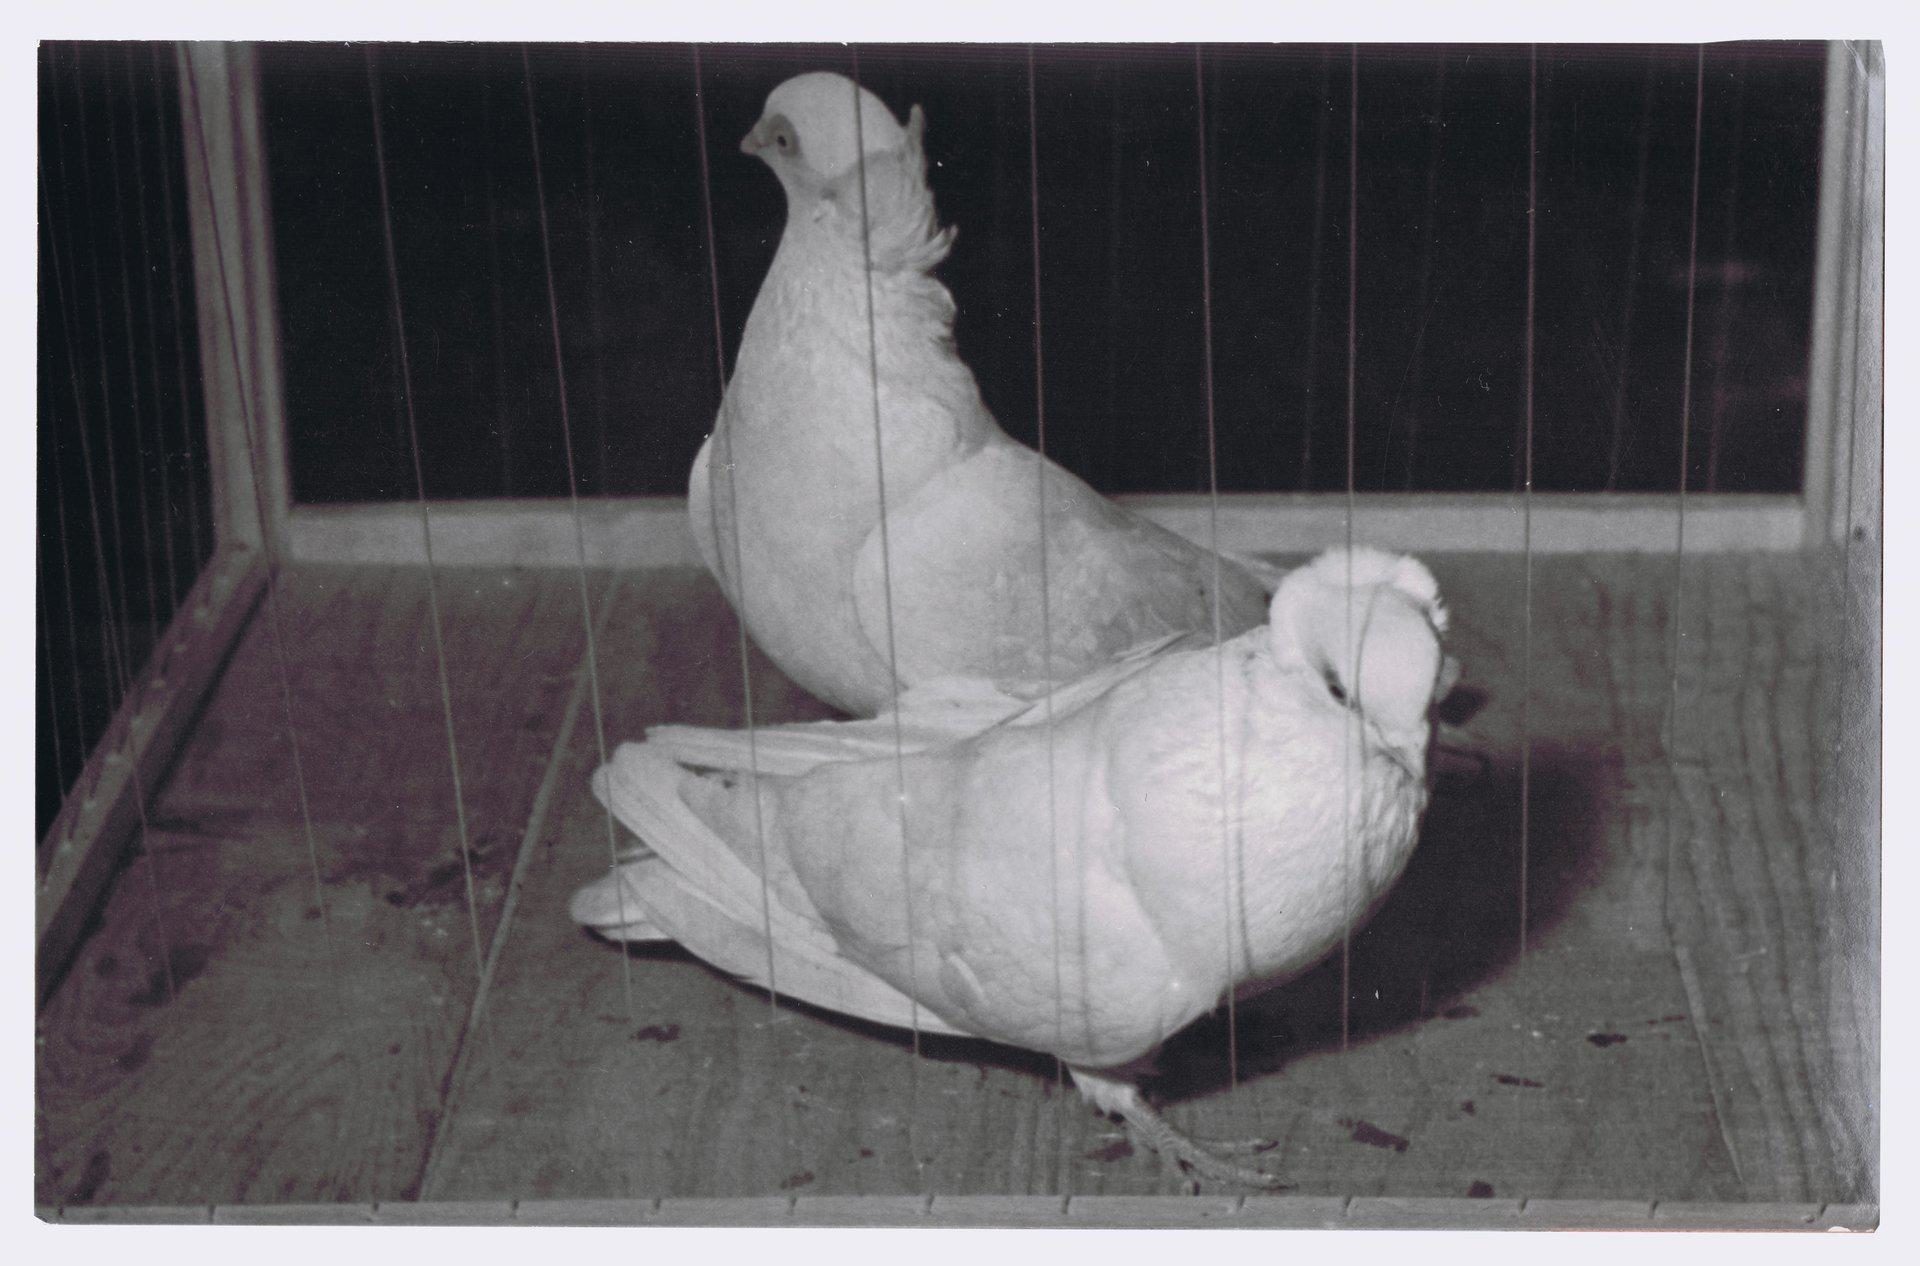 Petra Feriancová, Series Creator – From the Archive of O. Ferianc, New Breeds 1949-1952, 2008, (5/112)